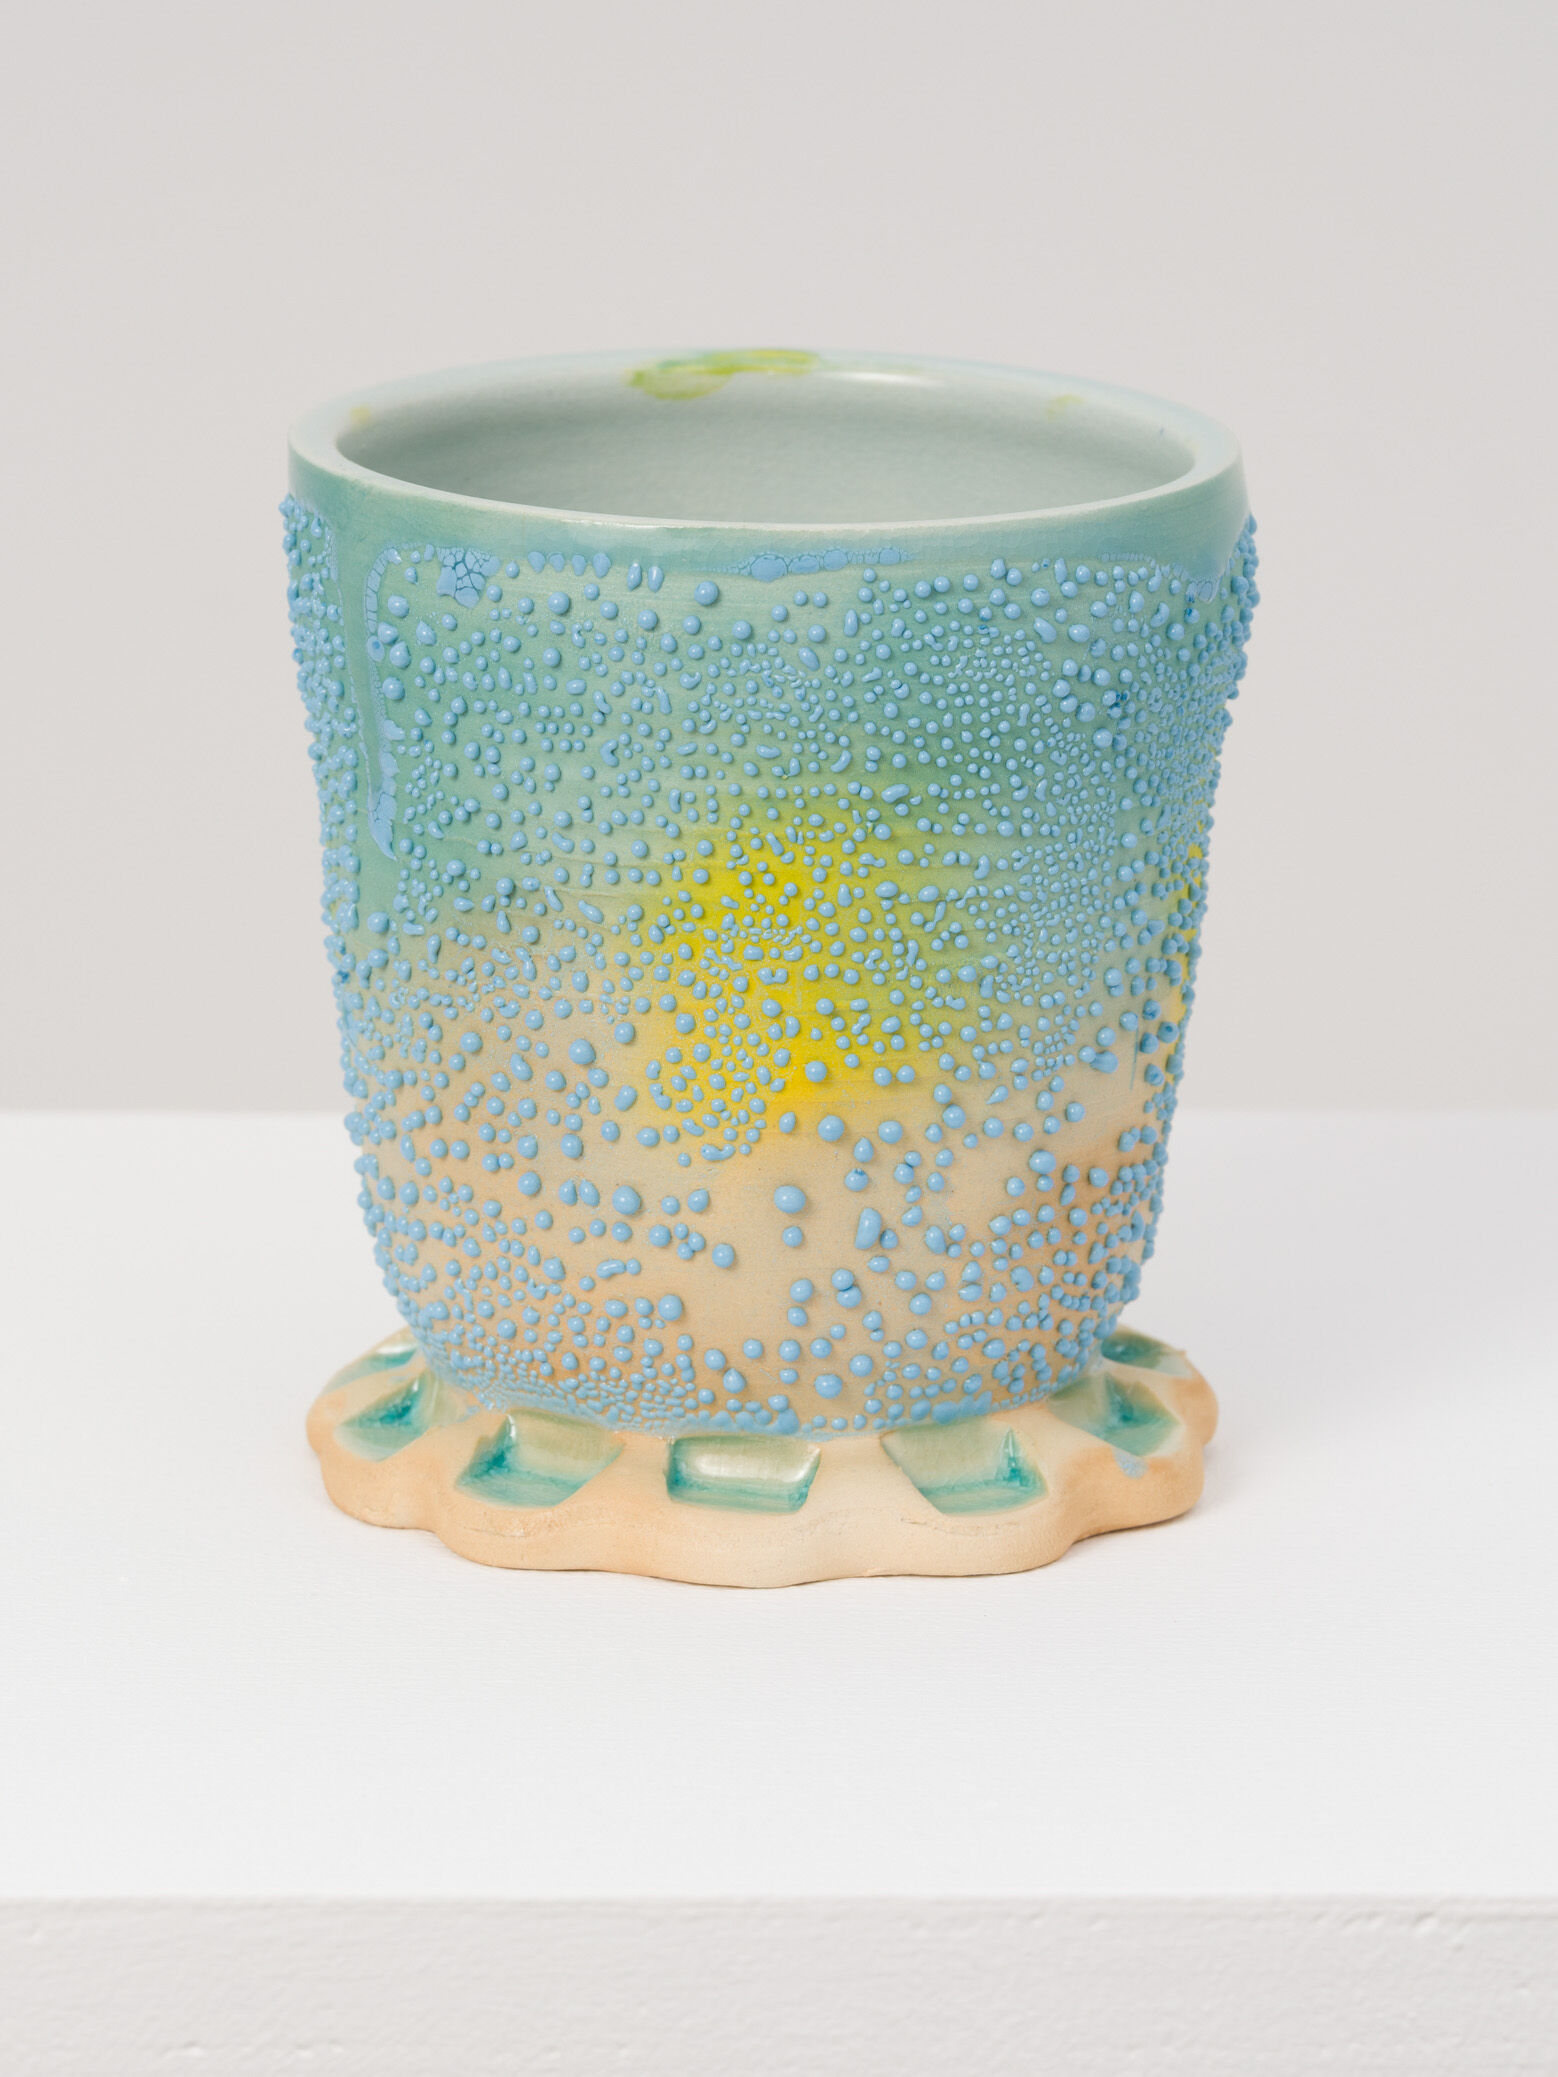 A light blue ceramic cup with a yellow spot by the artist Sharif Farrag